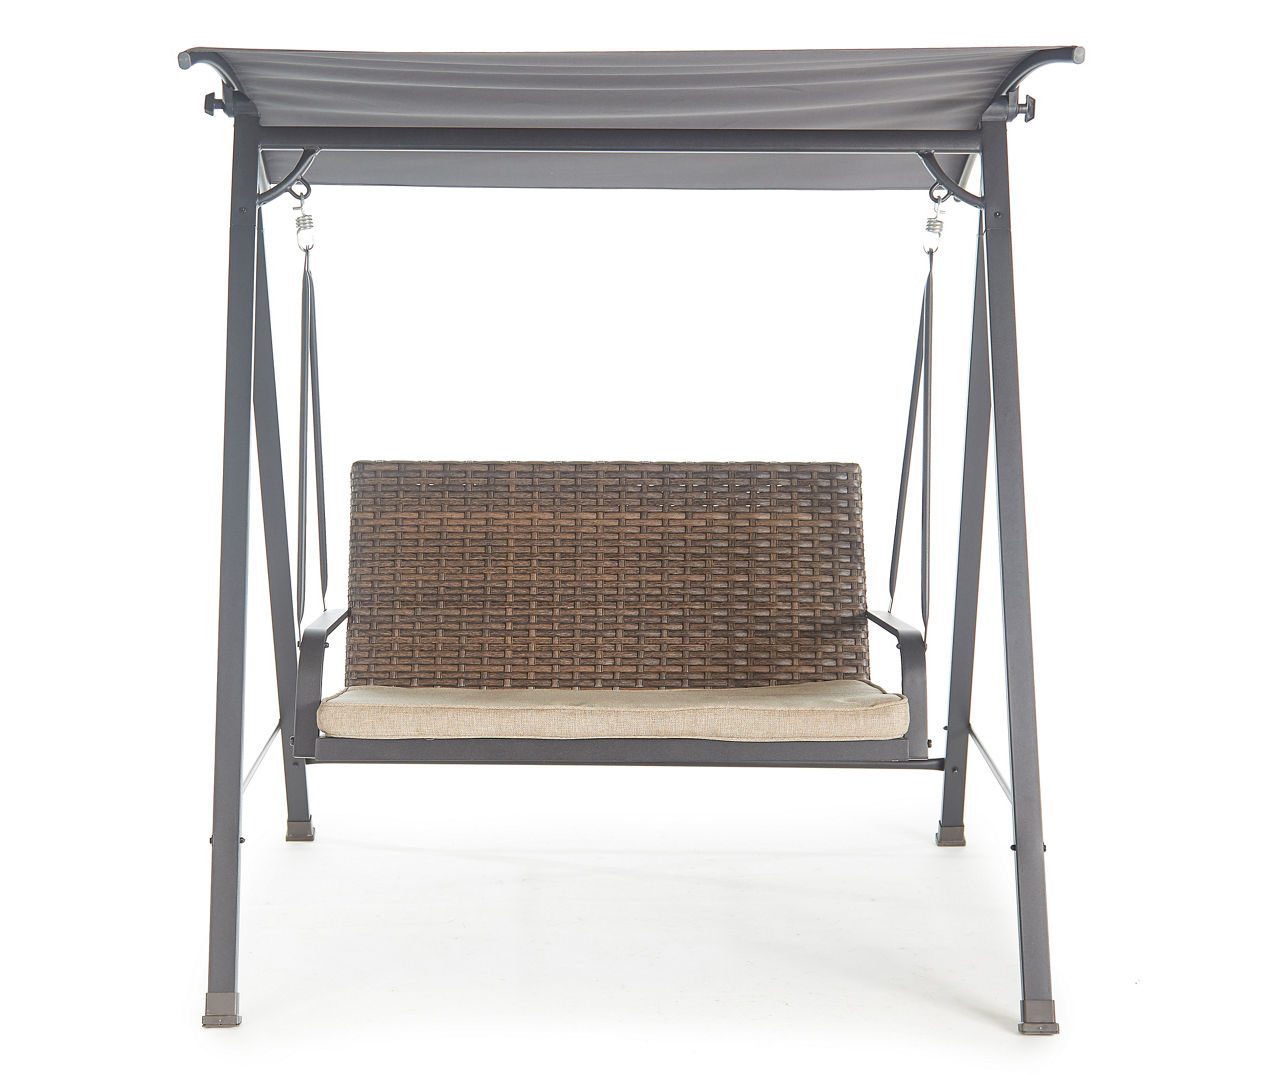 Autumn Cove Tan All-Weather Wicker Cushioned 2-Person Patio Swing with Canopy